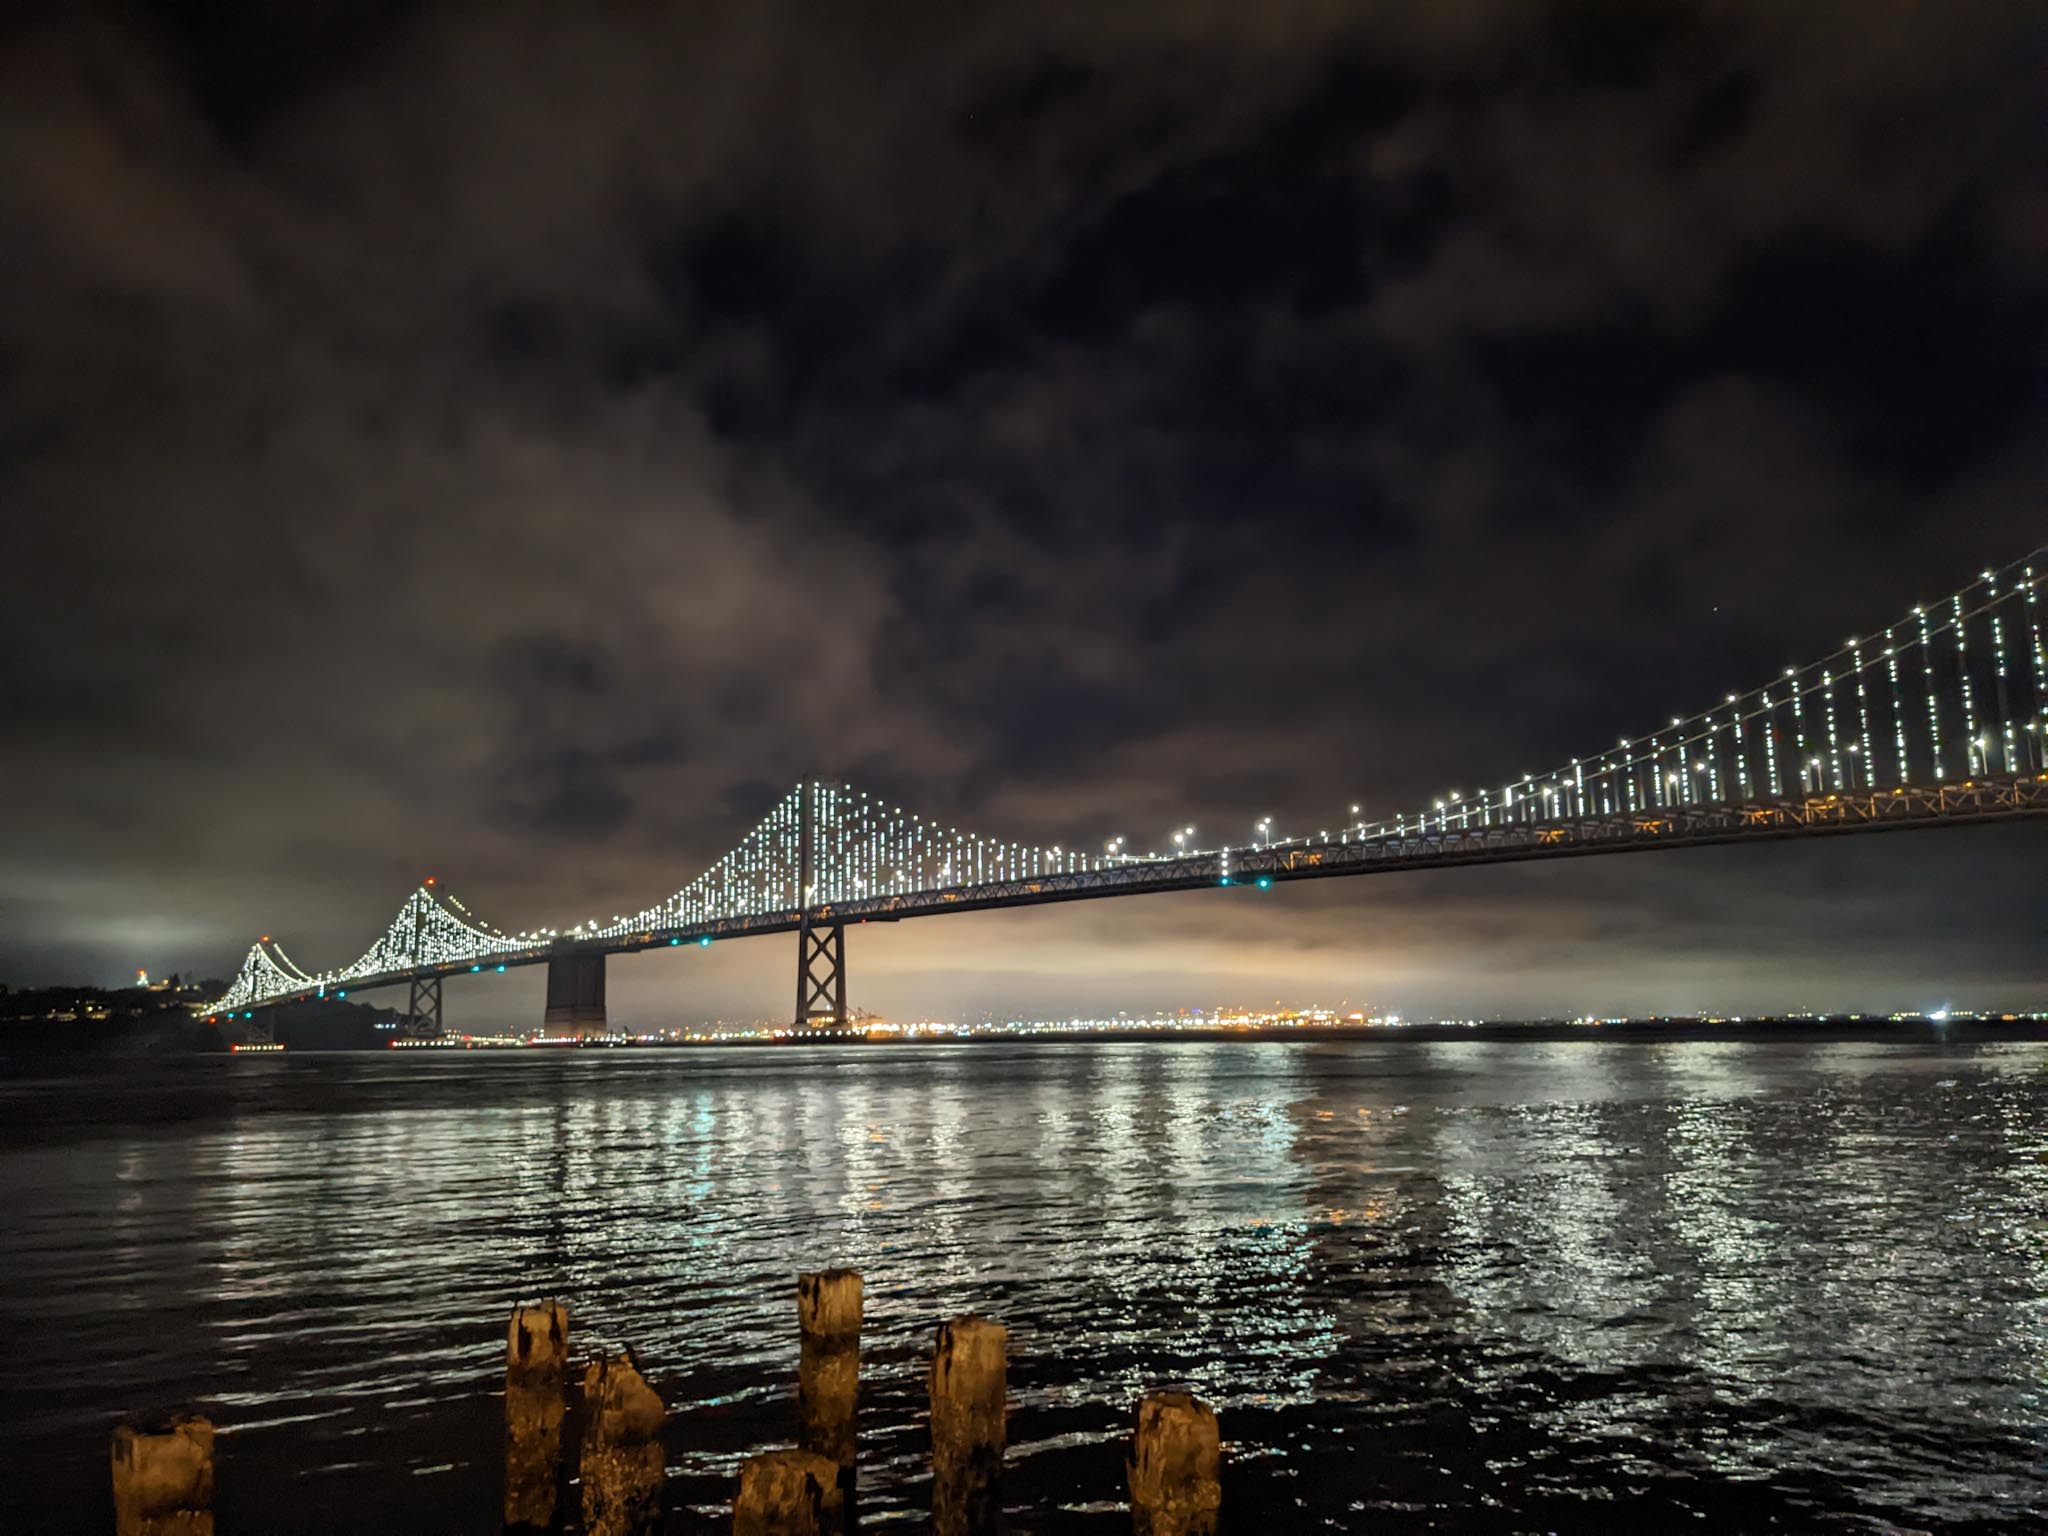 The Bay Bridge at night as viewed from the Embarcadero in San Francisco. You can also see the lights from Oakland in the distant background.